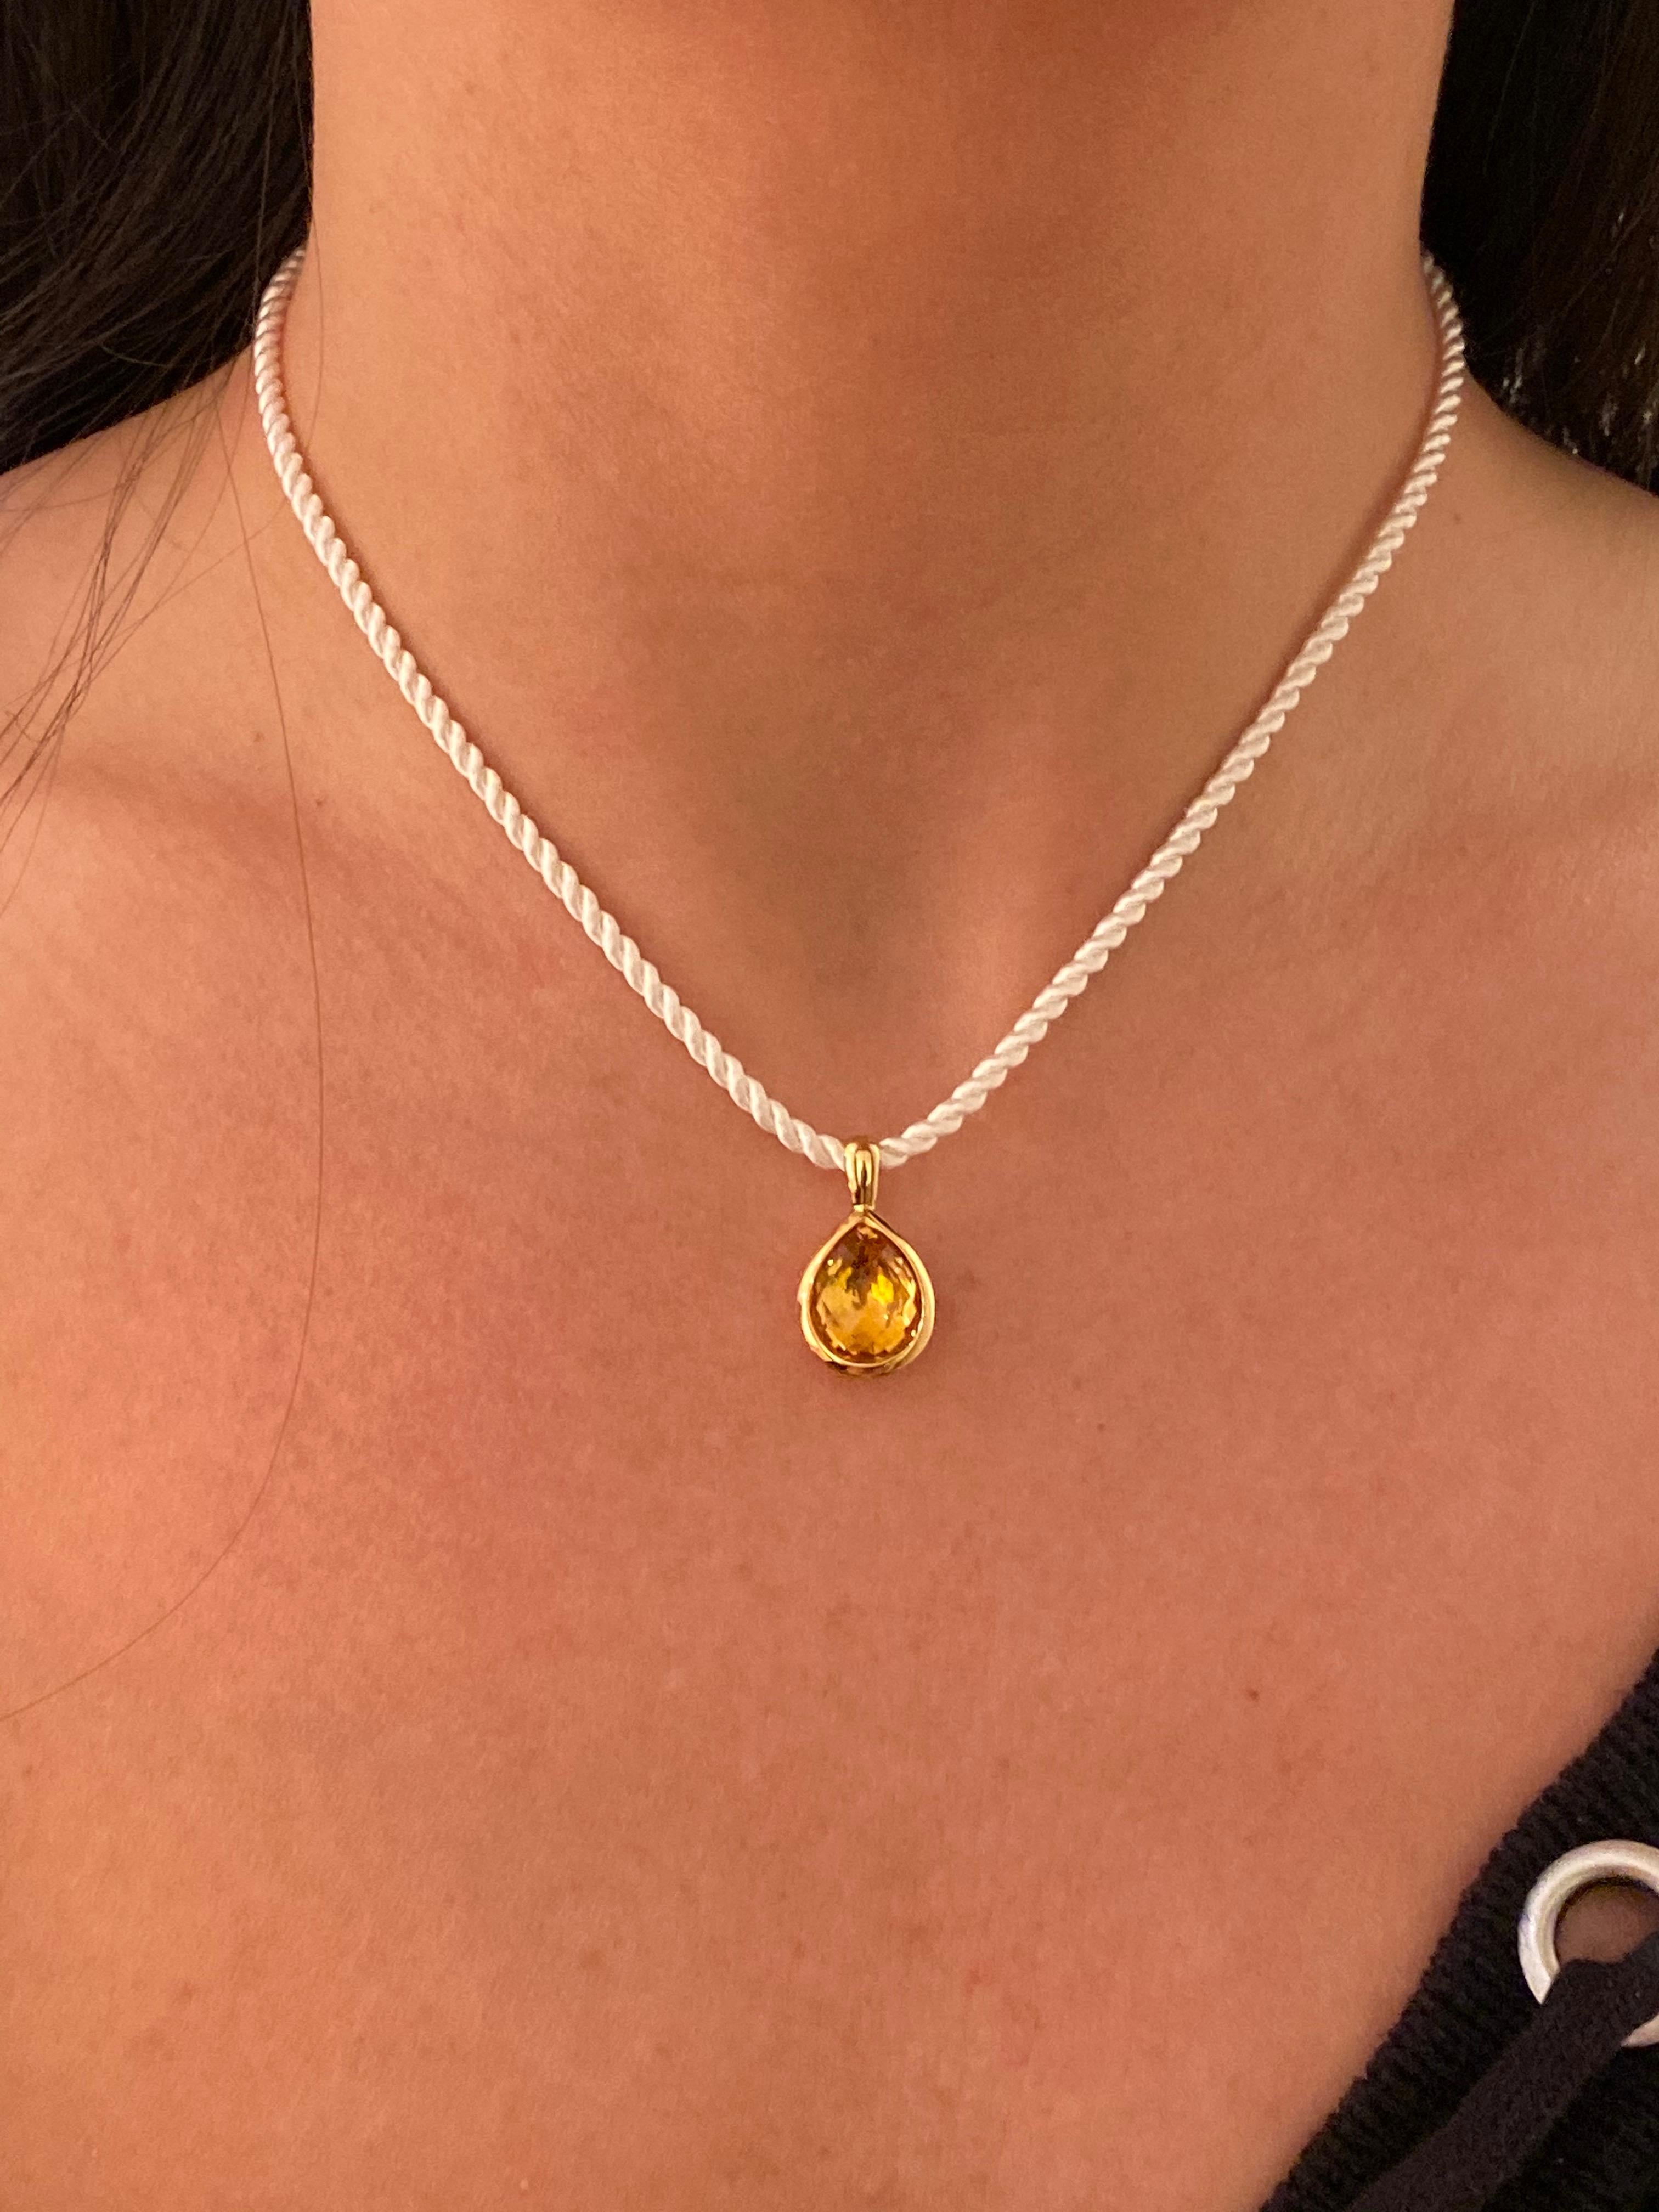 Hammerman Brothers 18 karat yellow gold pear shape citrine pendant on white silk cord. Citrine is 4.6 carats, cord length is 16